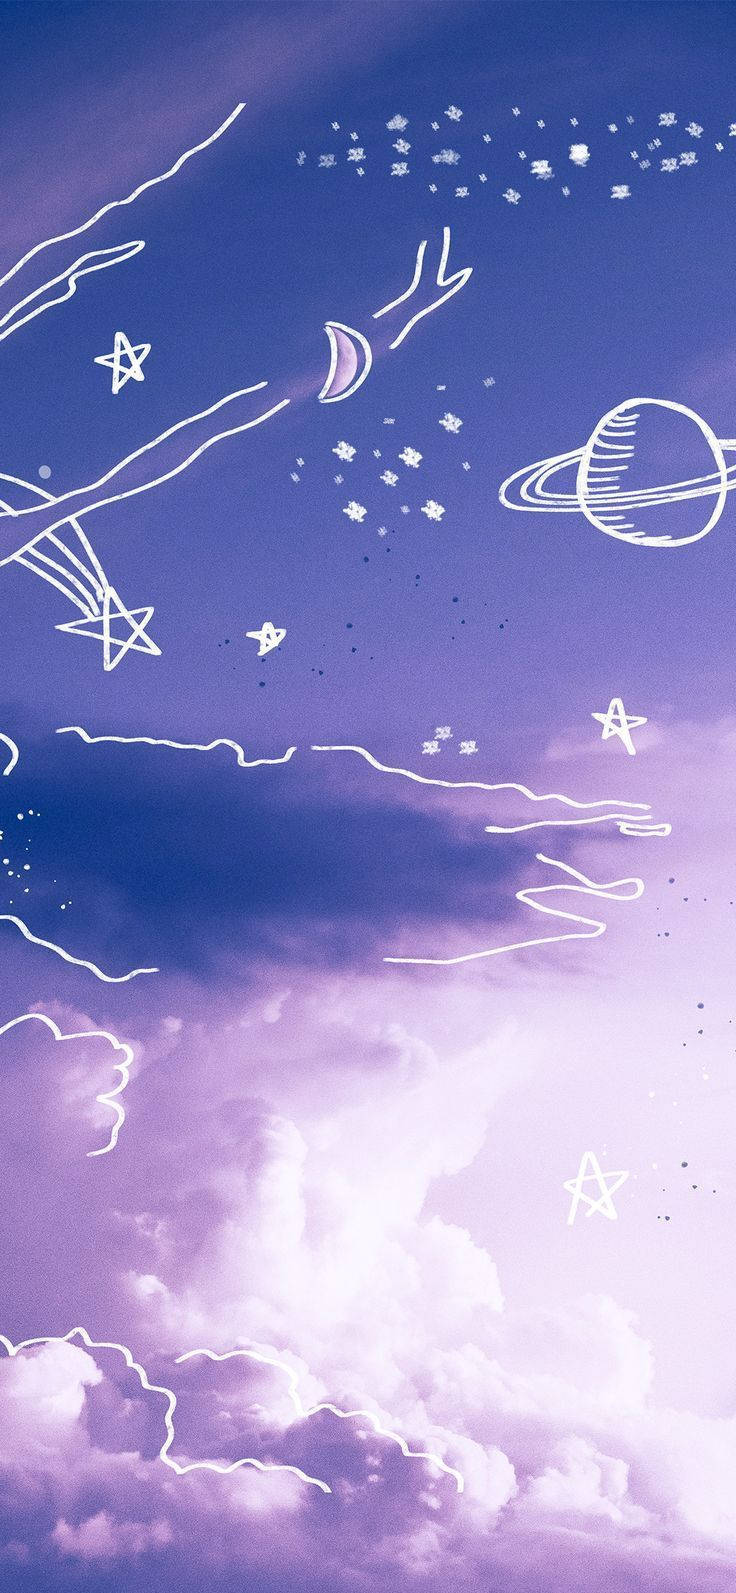 Aesthetic phone wallpaper of a purple sky with stars and clouds - Cute purple